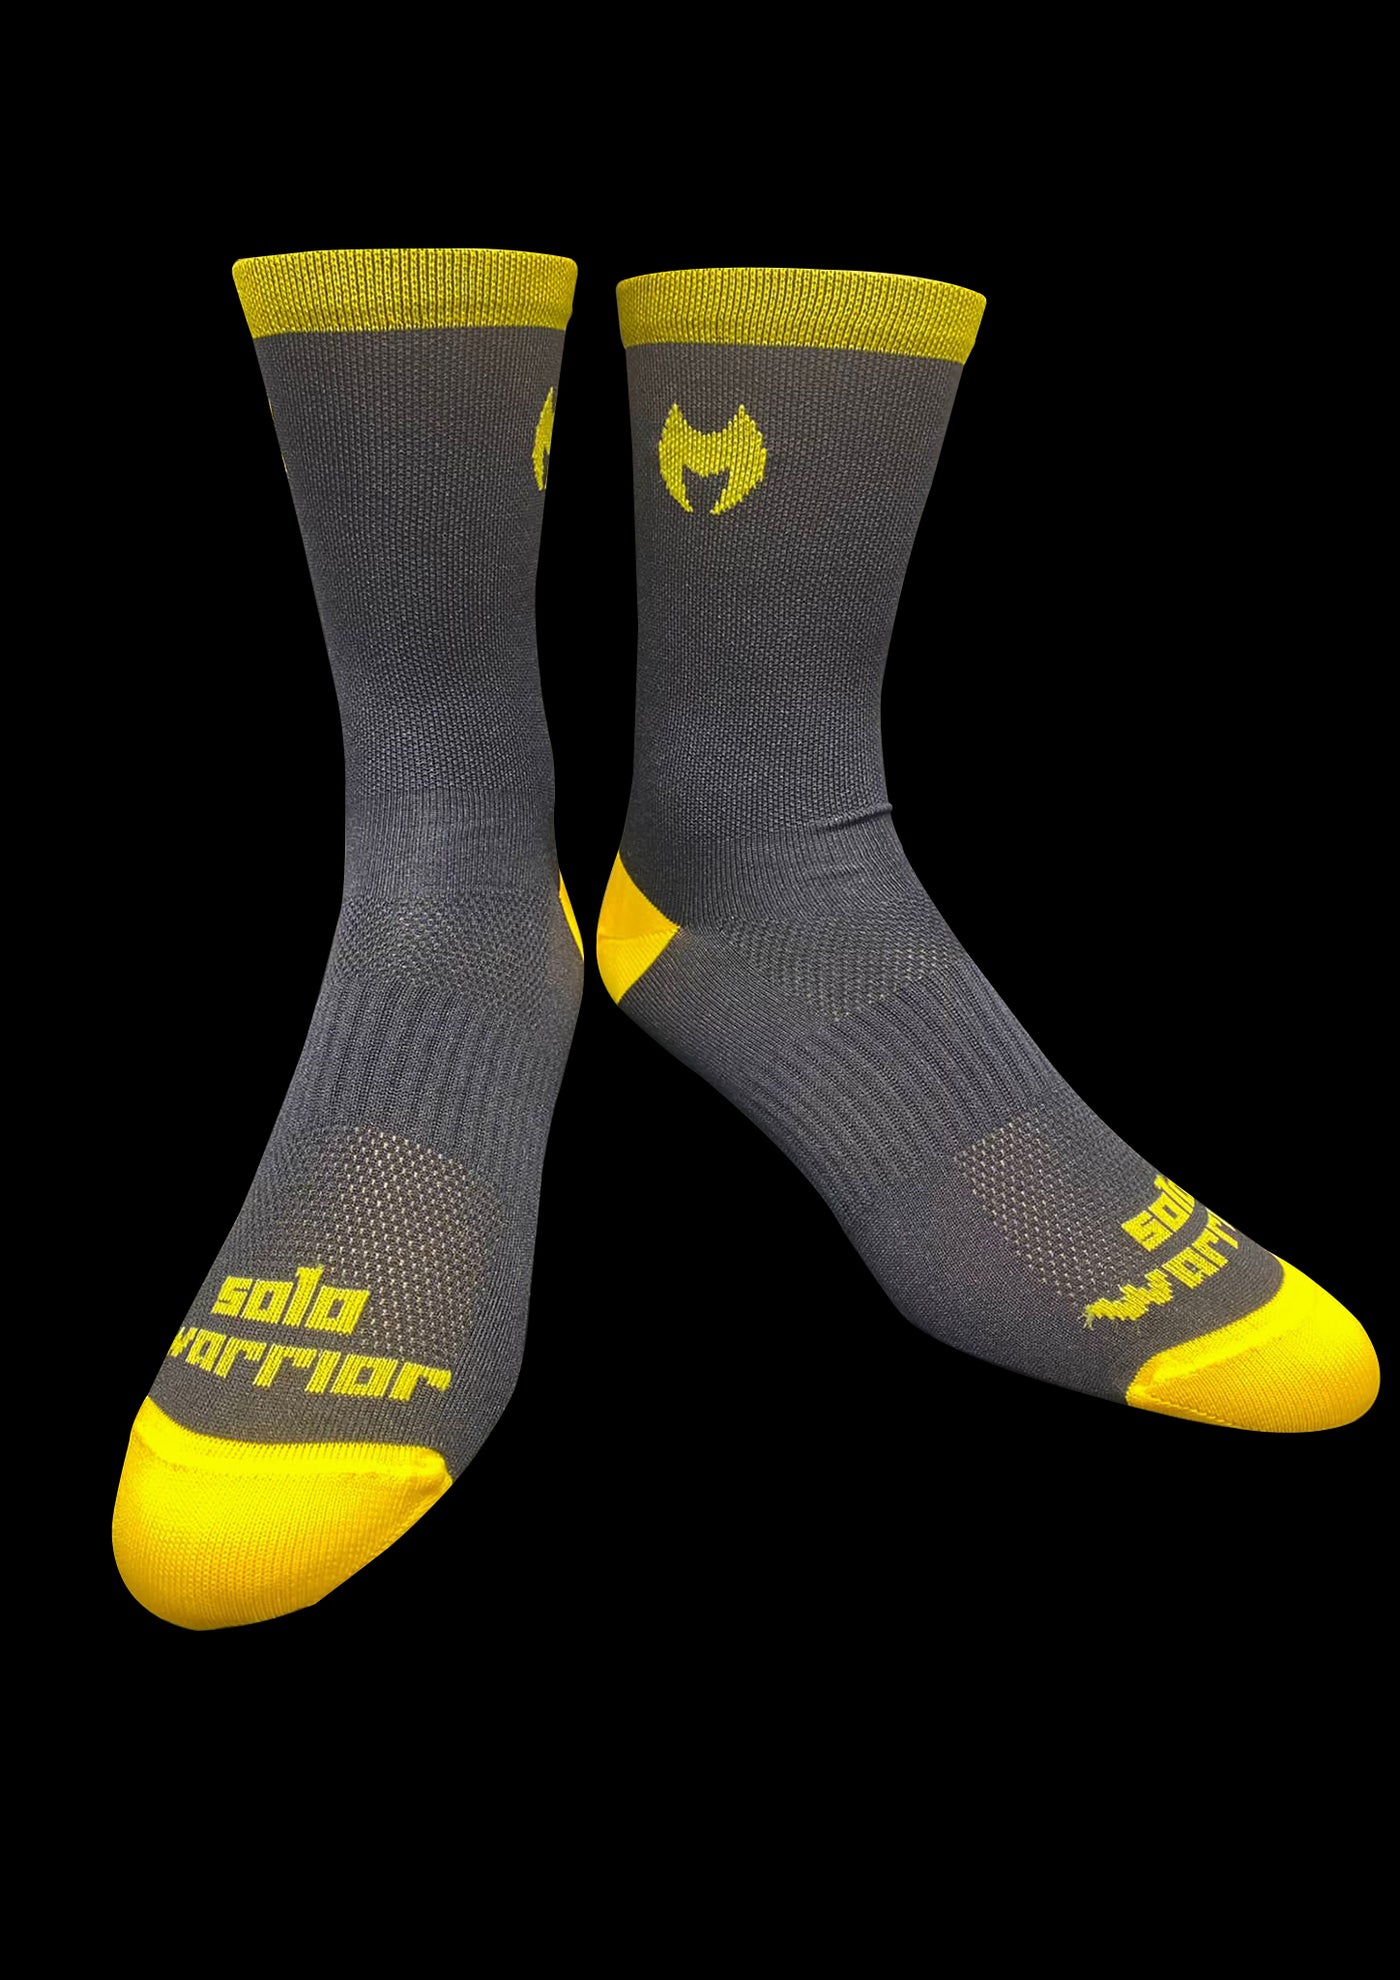 “ THE STRIP” our new  5” Cuff,  solid black with the yellow strip, cycling sock with more comfortable compression.